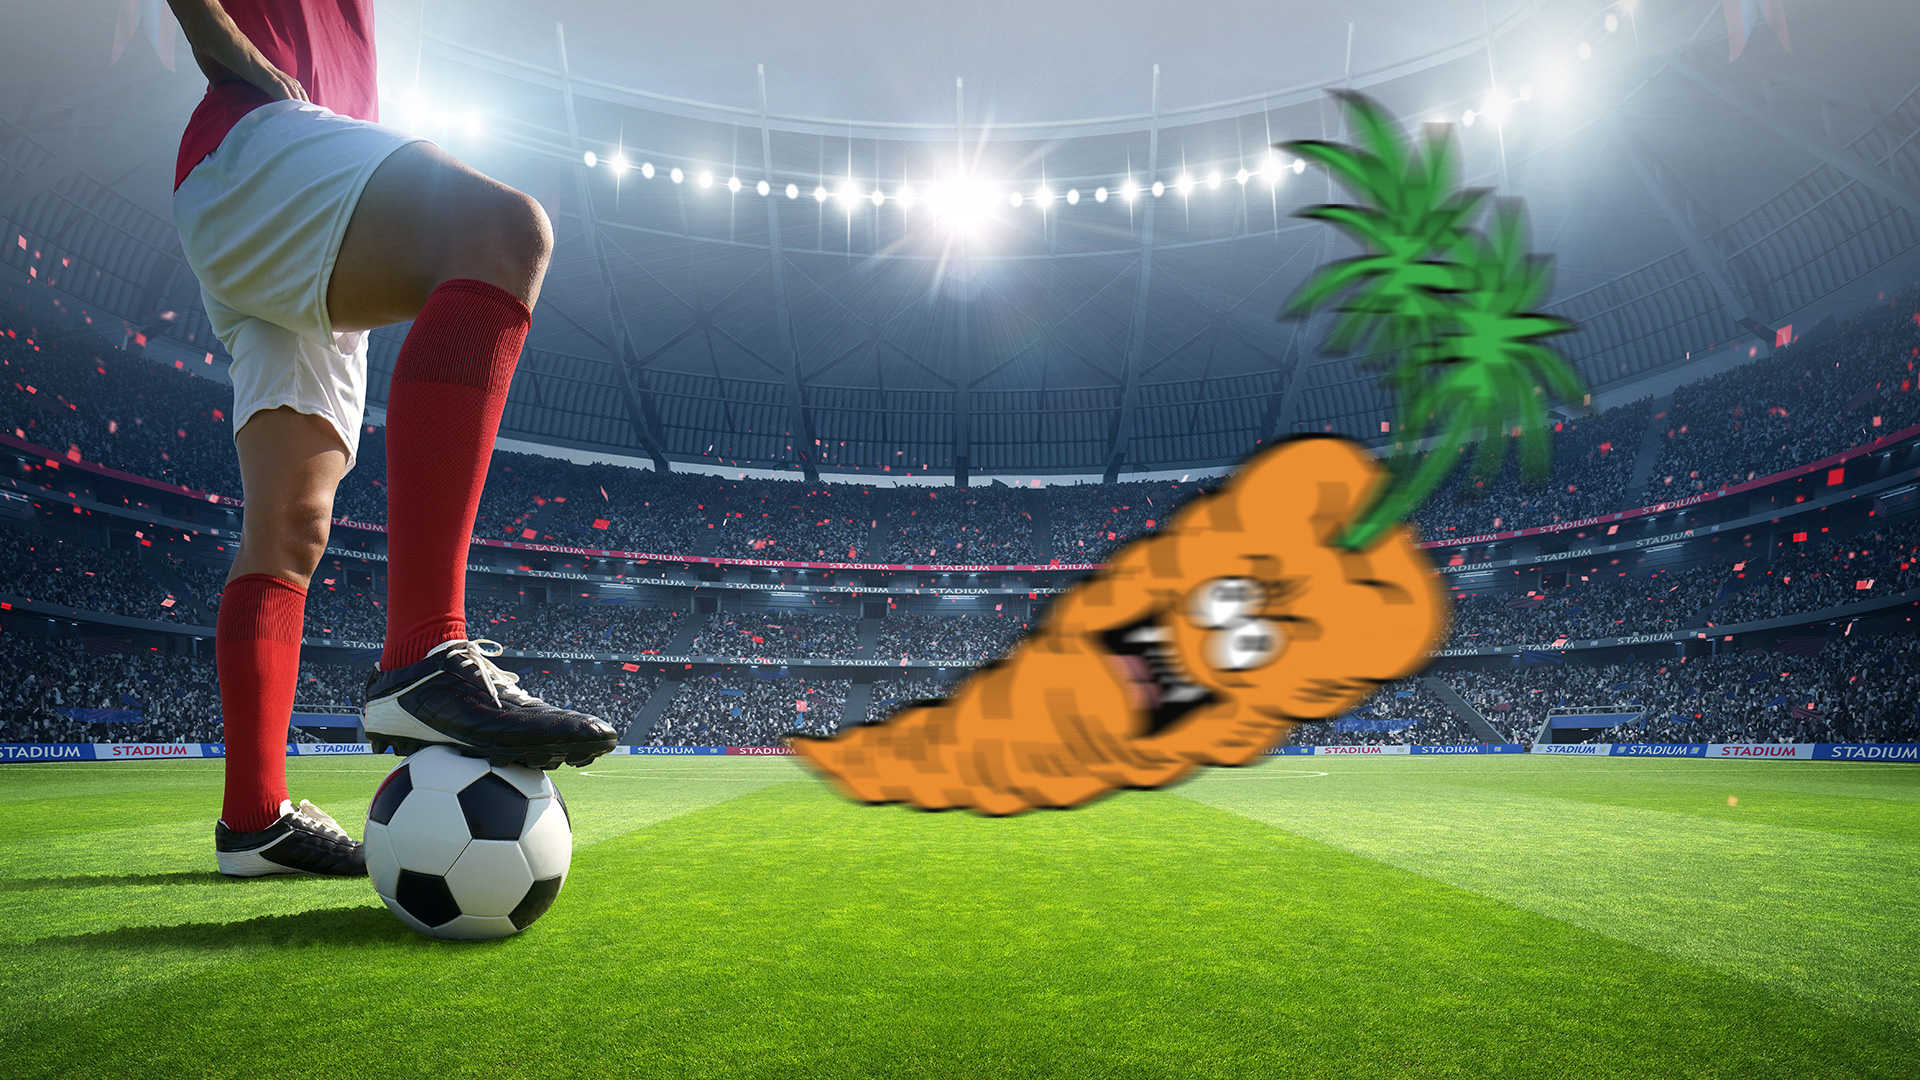 Footballer and carrot doing a sliding tackle